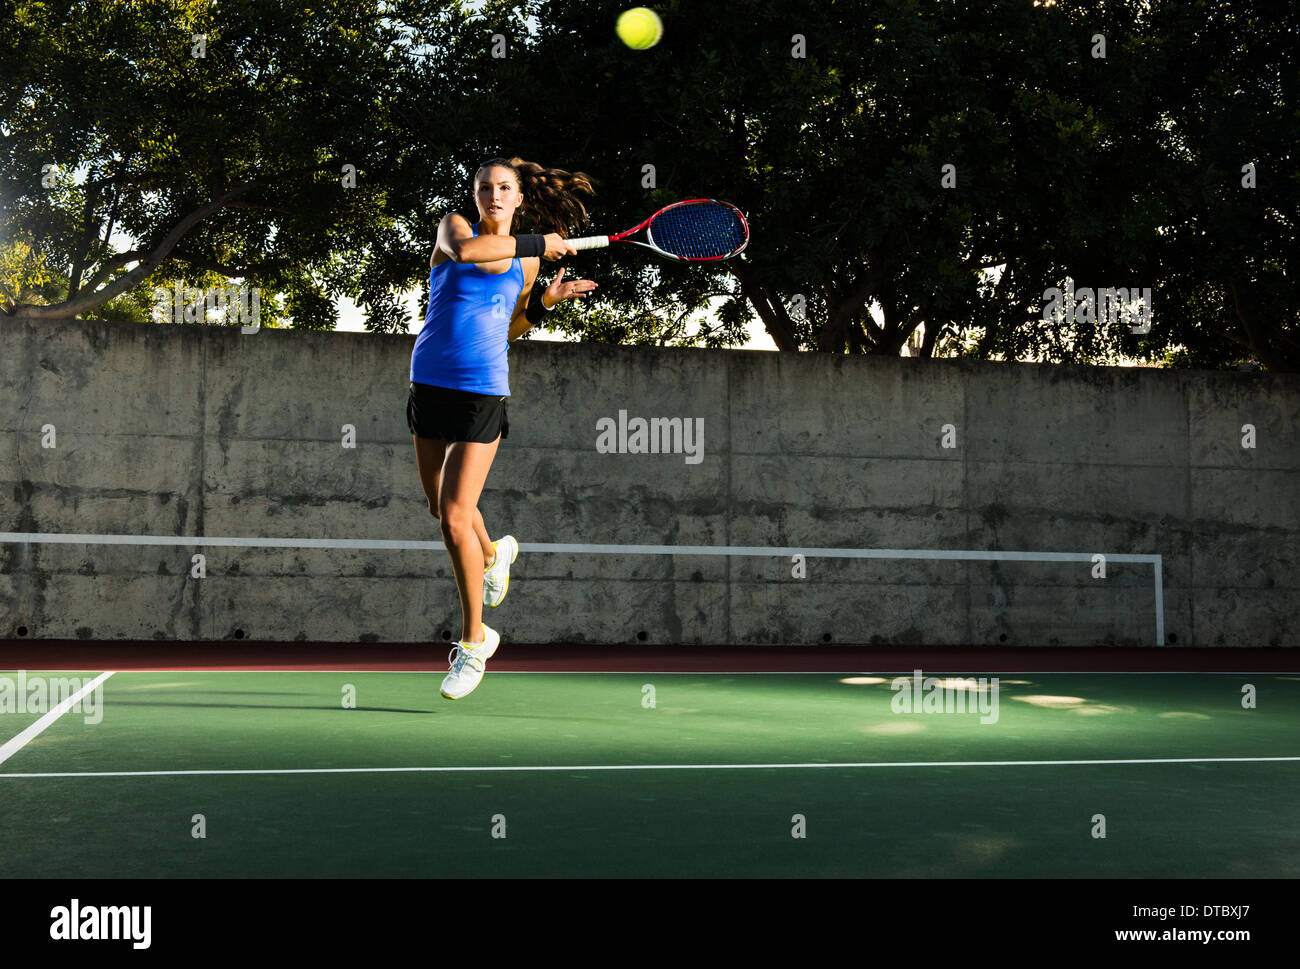 Tennis player hitting ball Banque D'Images